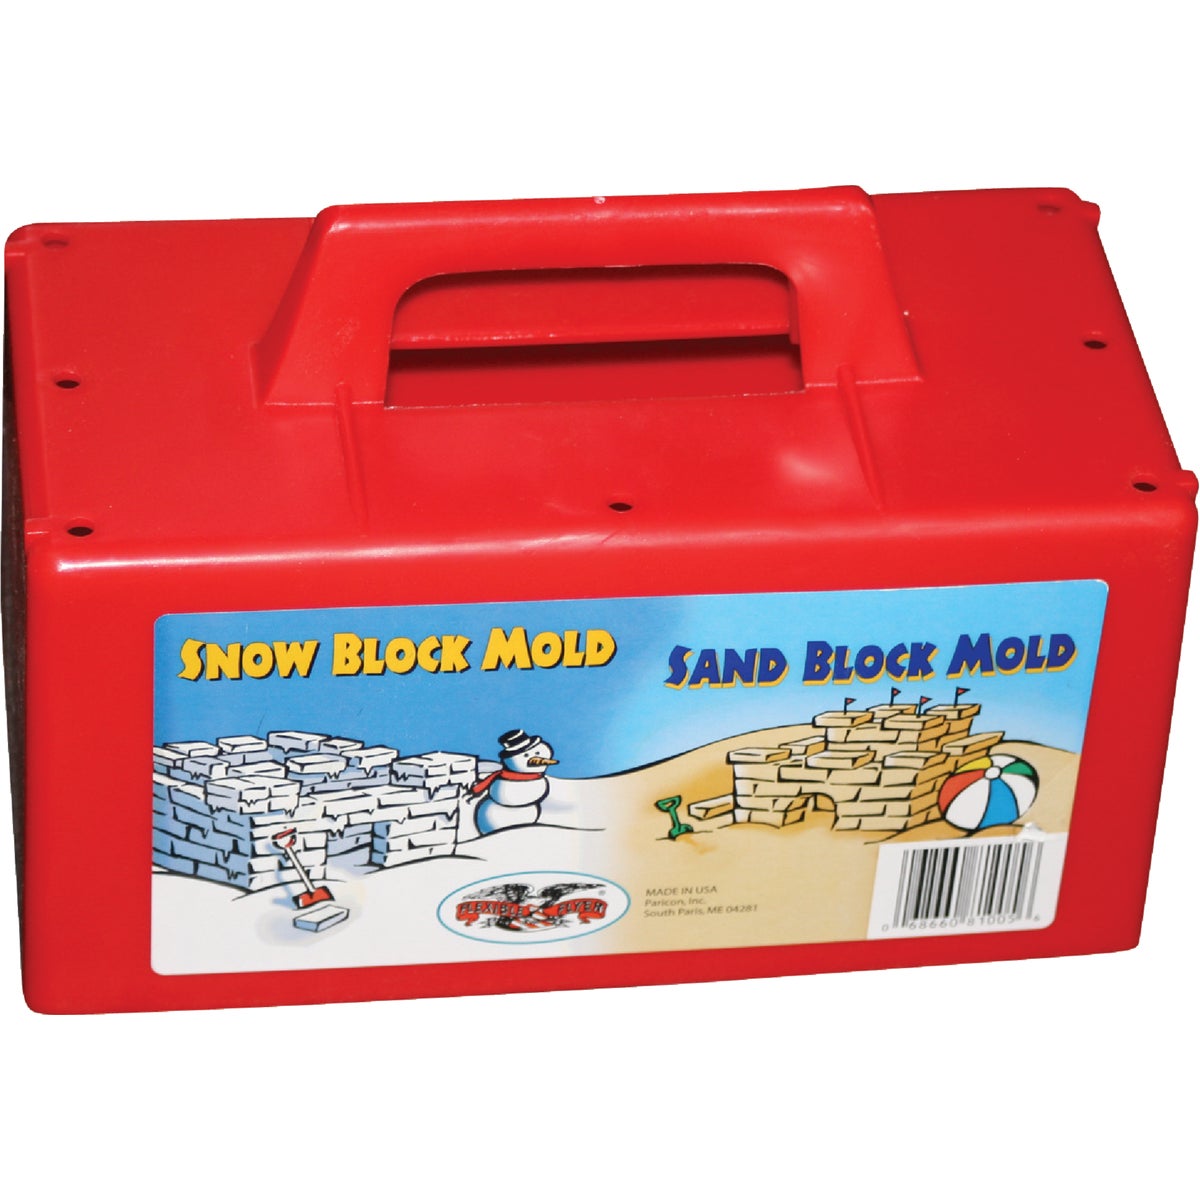 Item 808638, Create sand or snow bricks quick and easy.